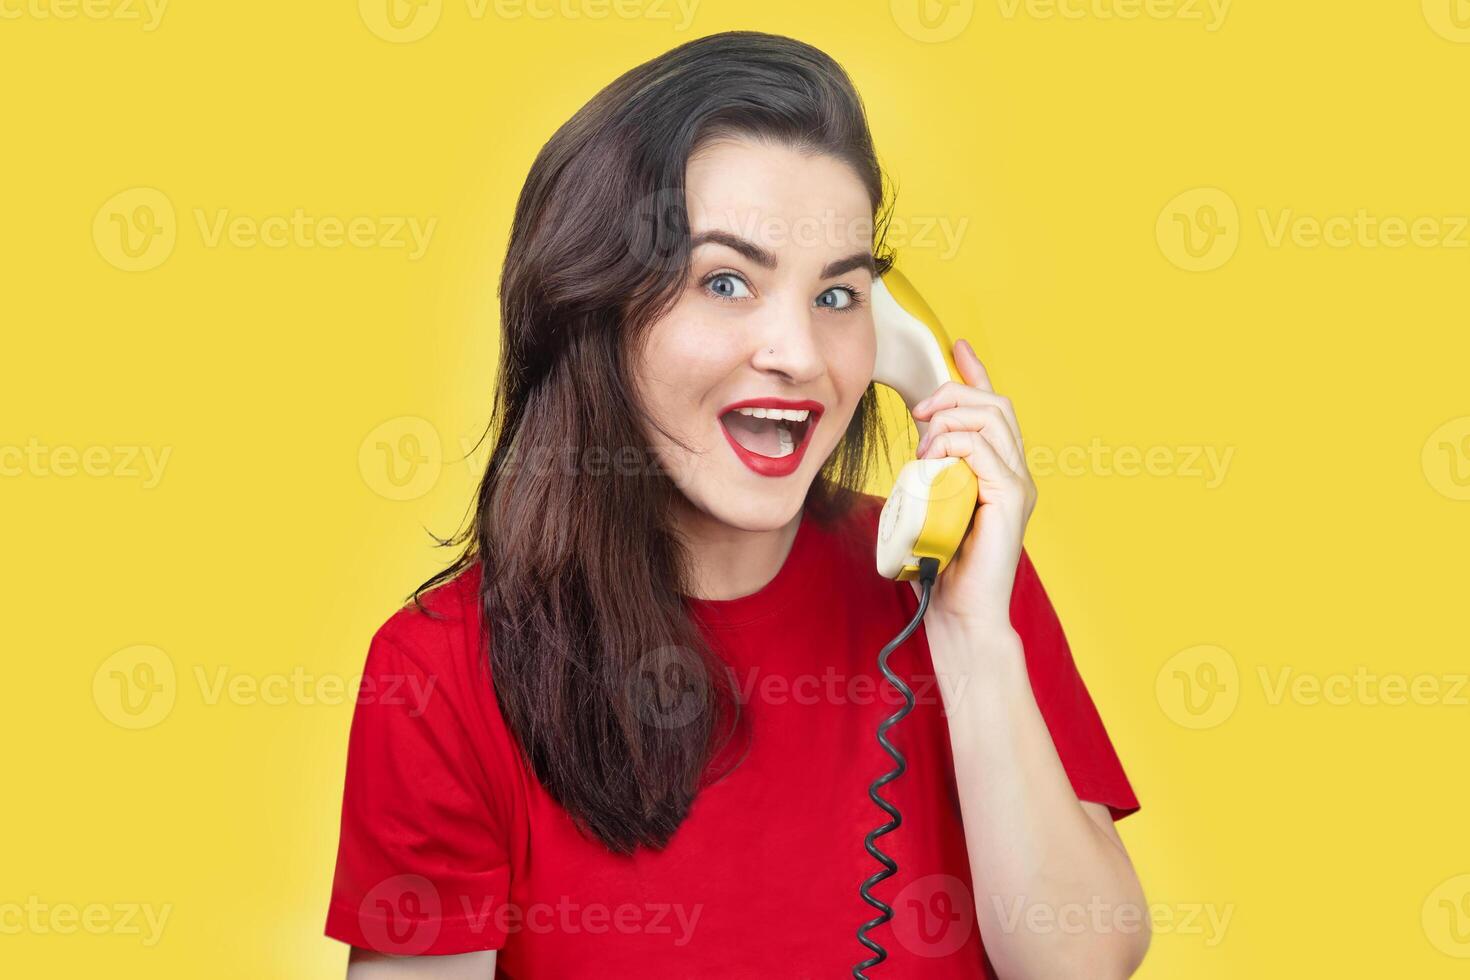 A beautiful brunette woman with red lipstick speaks on an old yellow telephone with a cord. She is smiling. on a yellow background photo